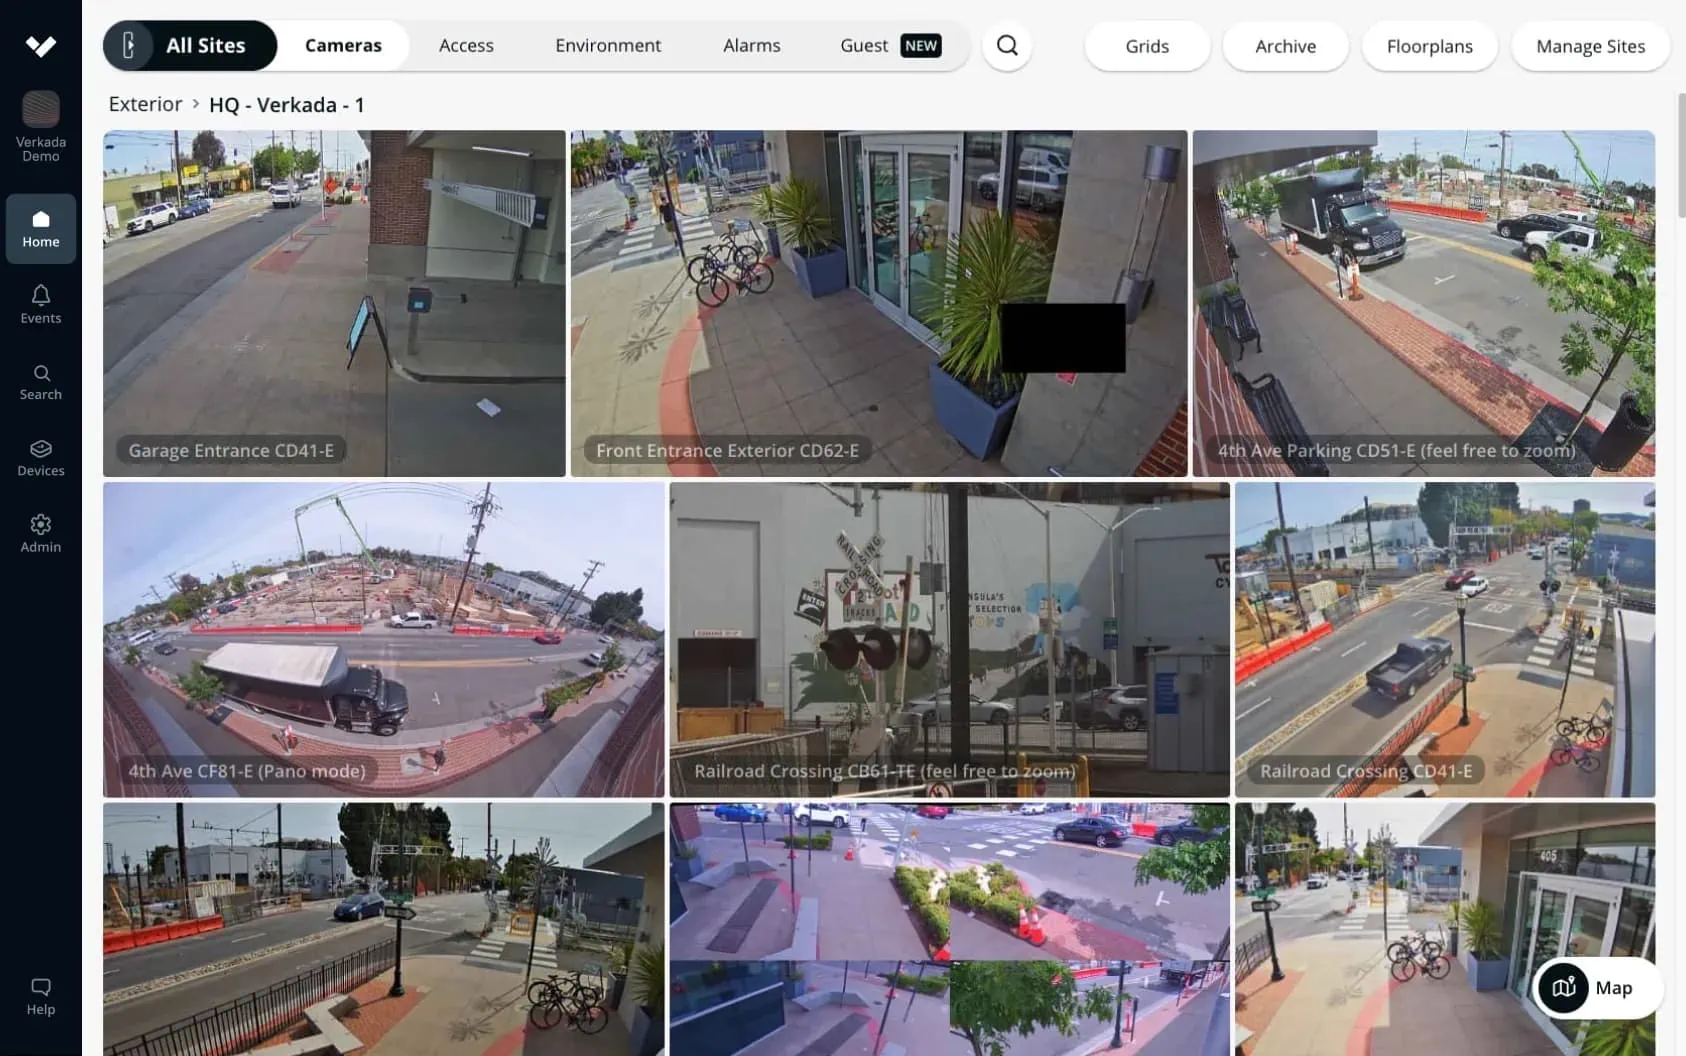 Remote monitoring using video recognition cameras